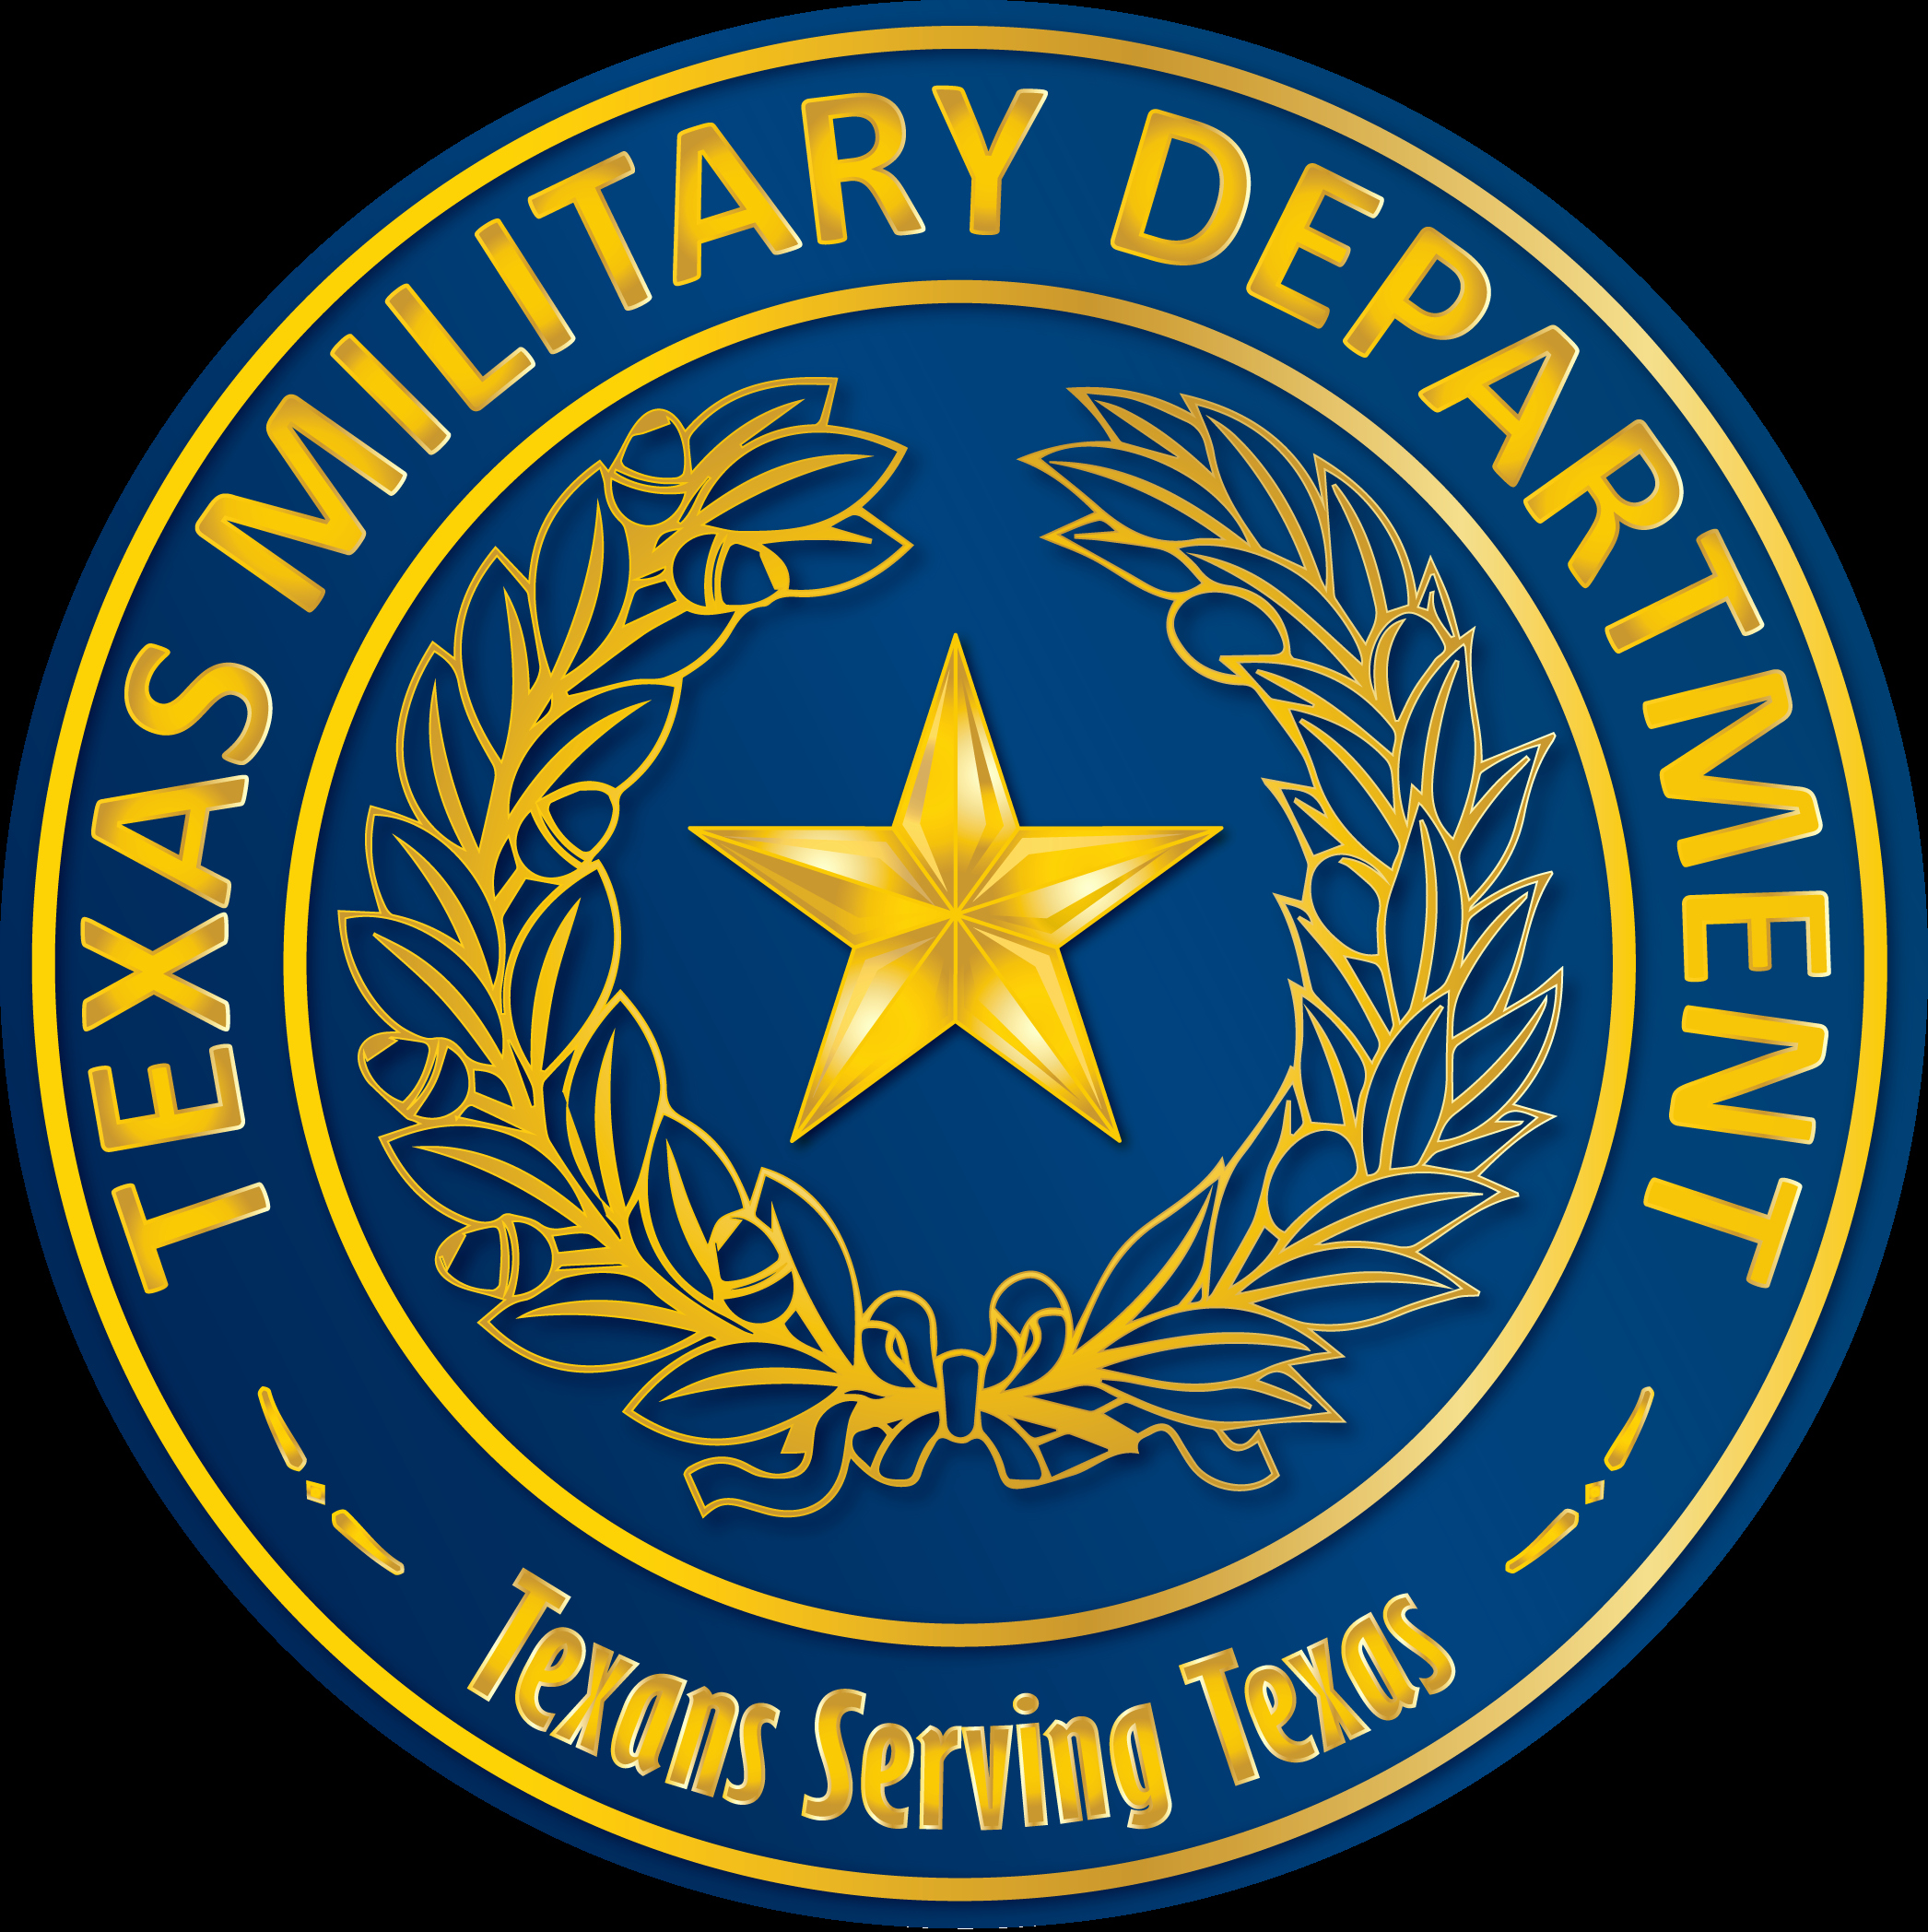 Official Seal Template Awesome Tmd Branding Texas Military Department